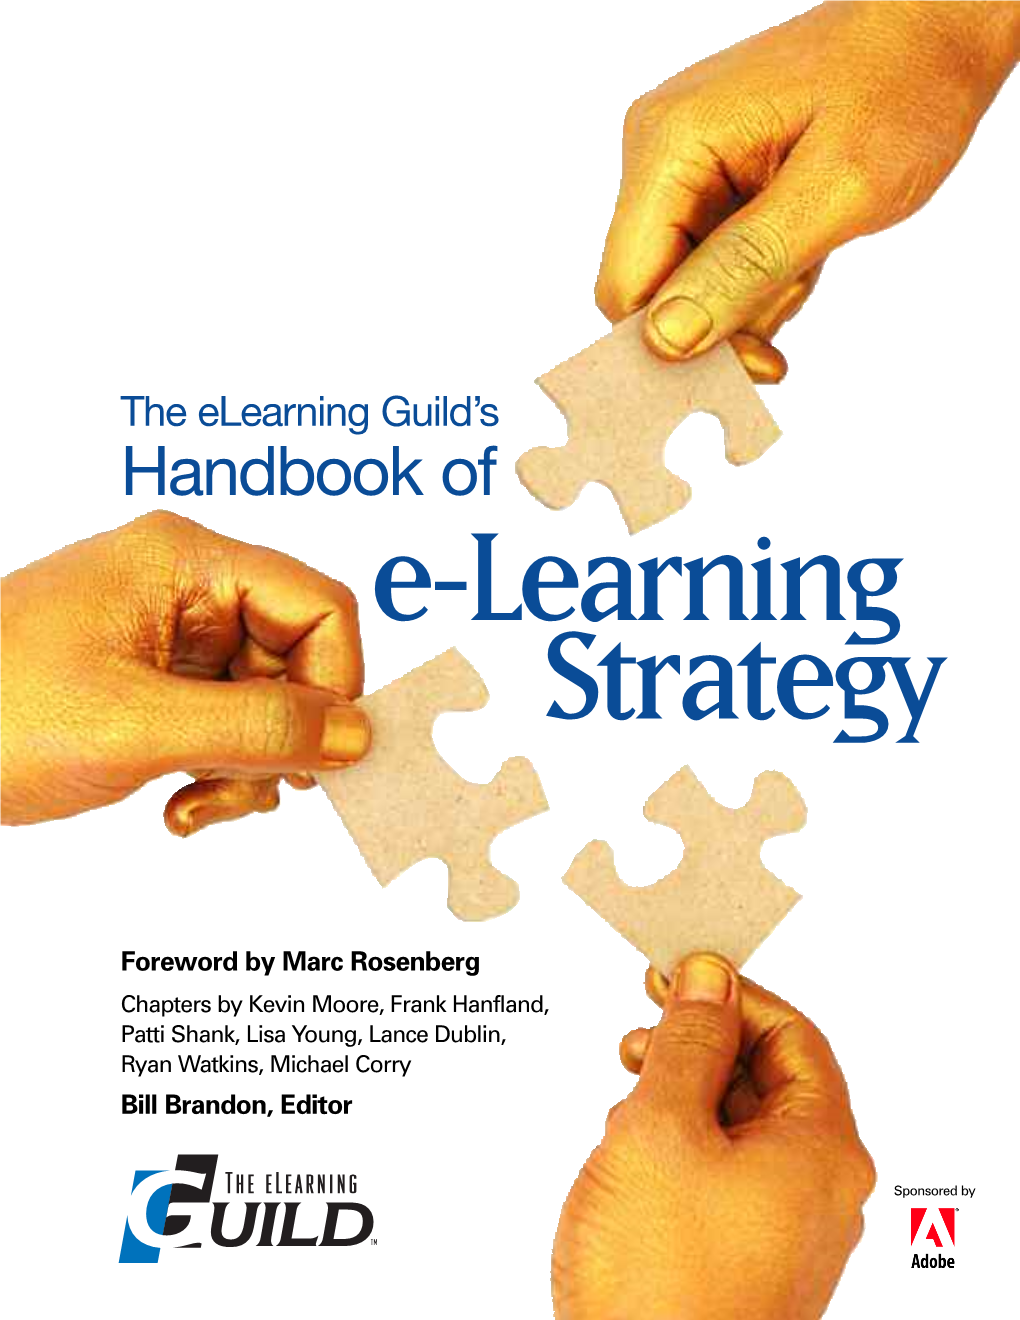 The Elearning Guild's Handbook of E-Learning Strategy